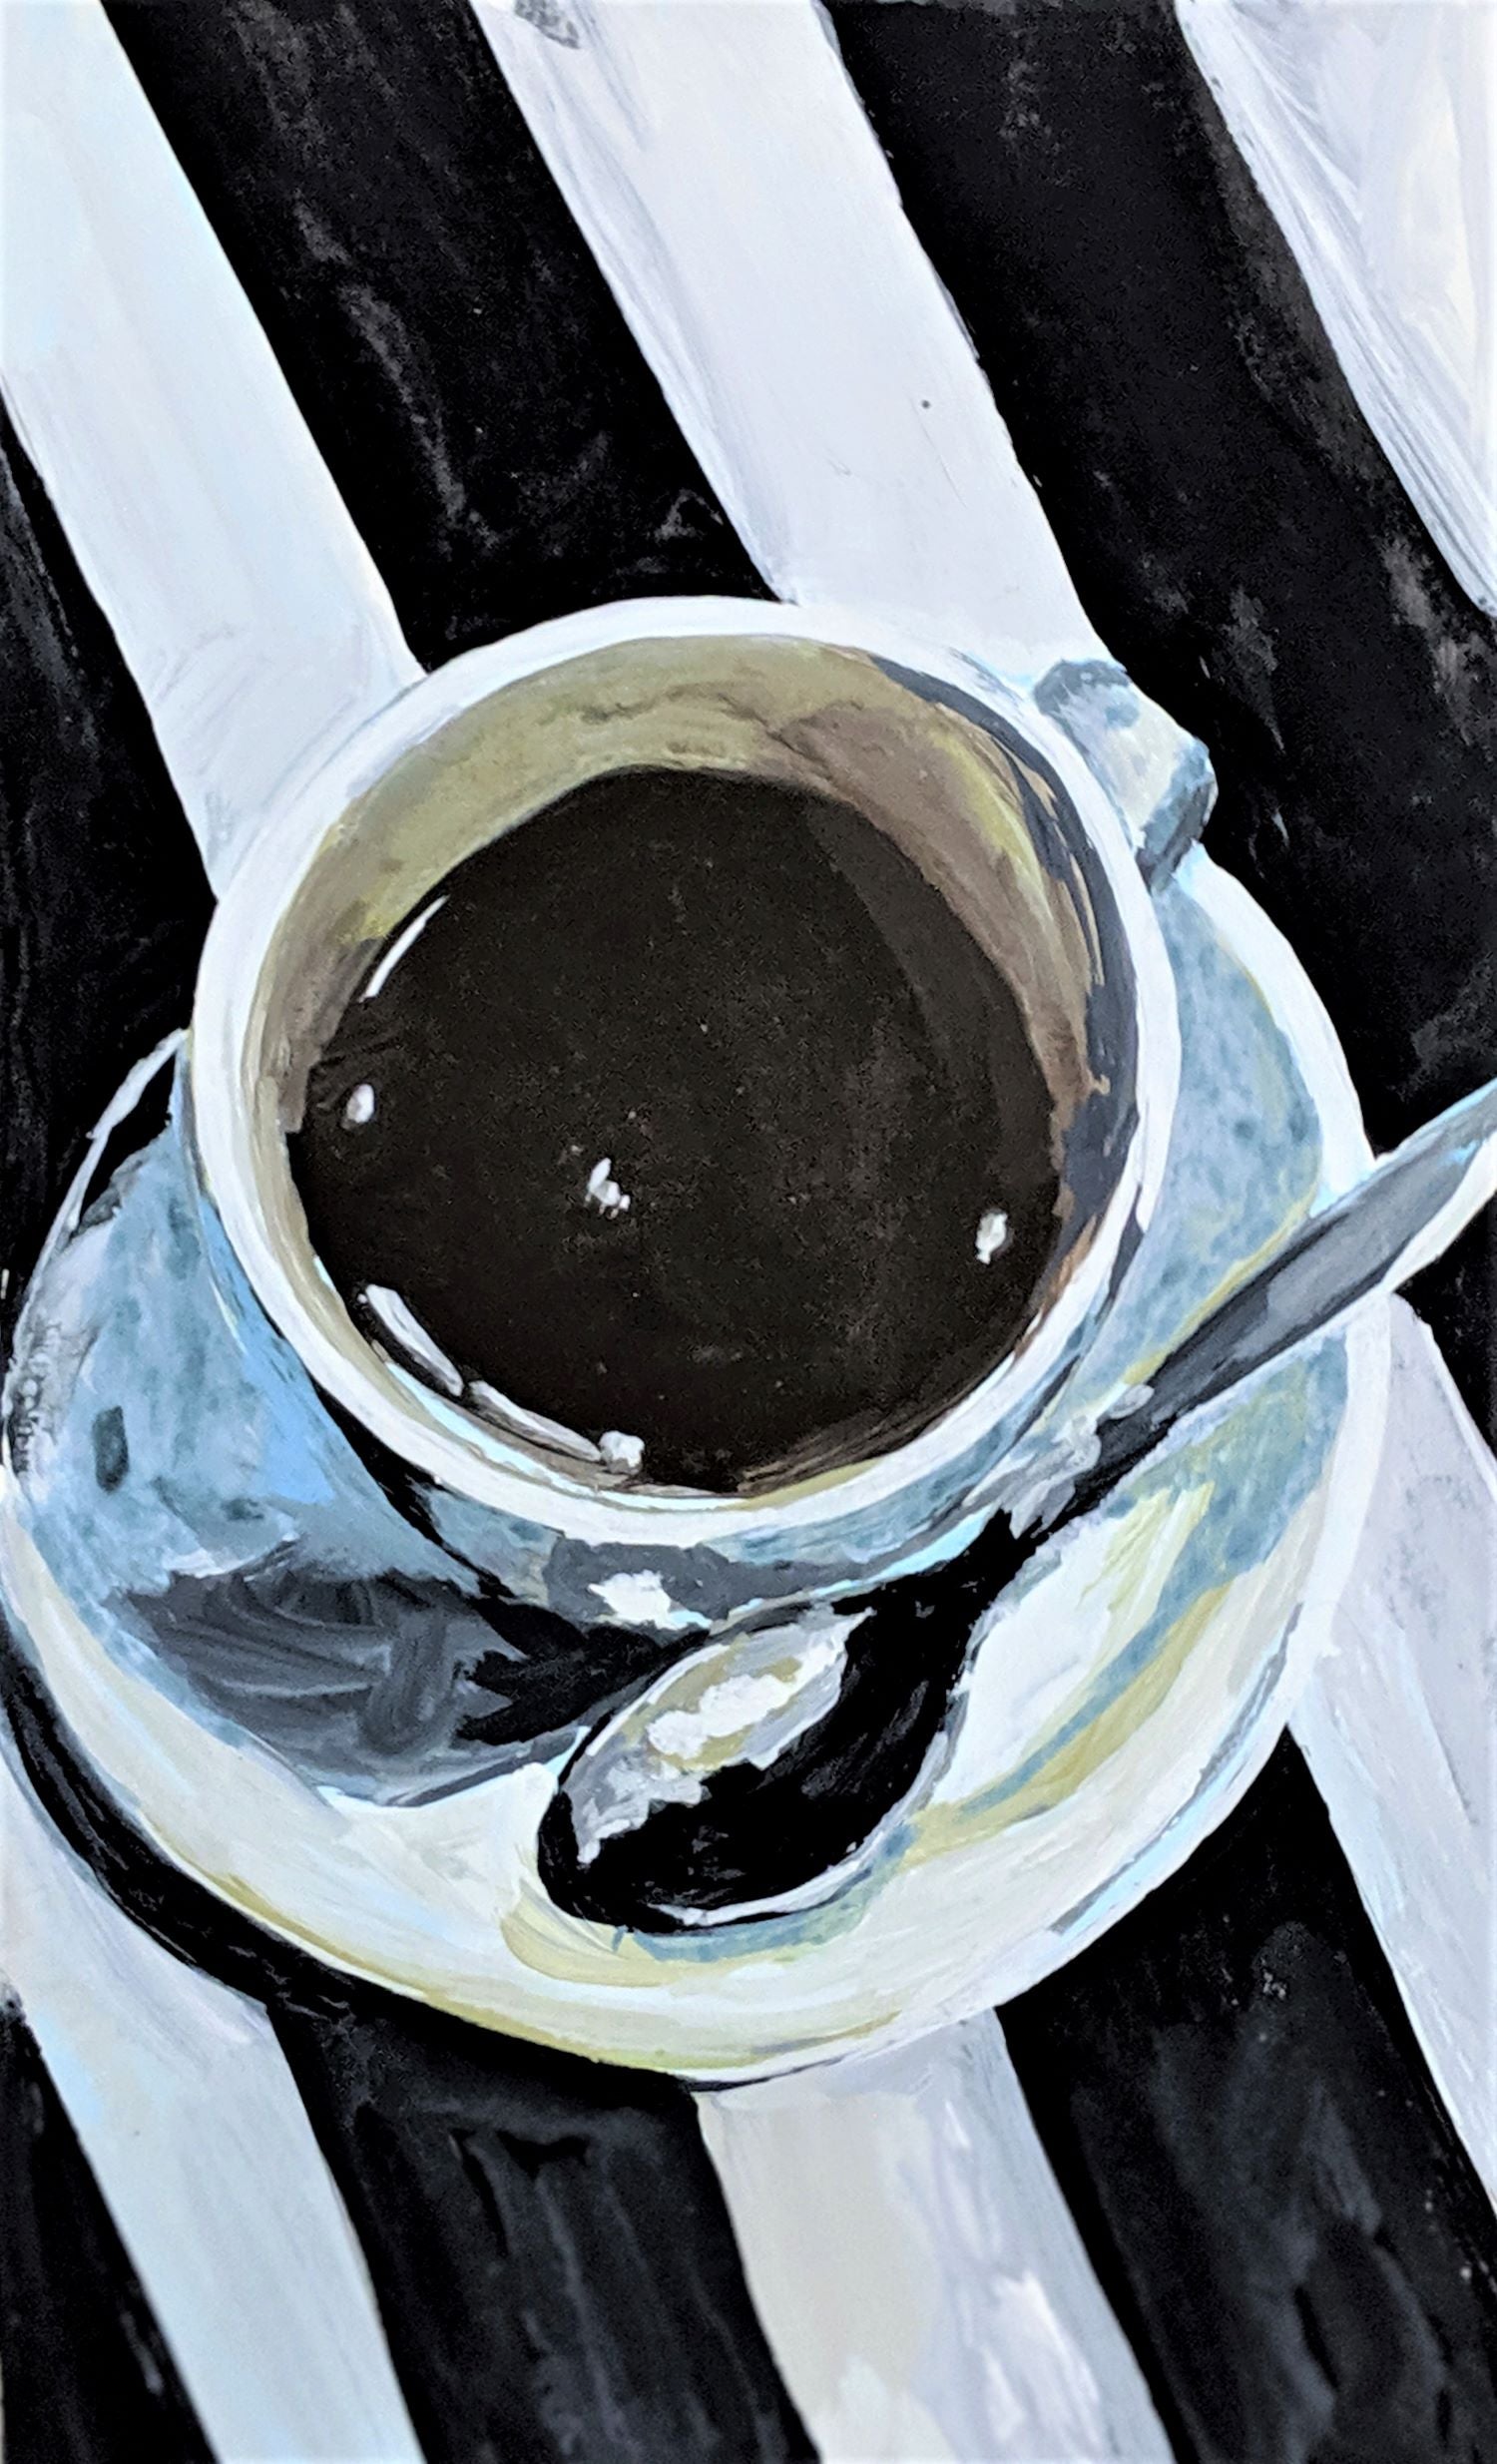 Hot chocolate in Porto painting